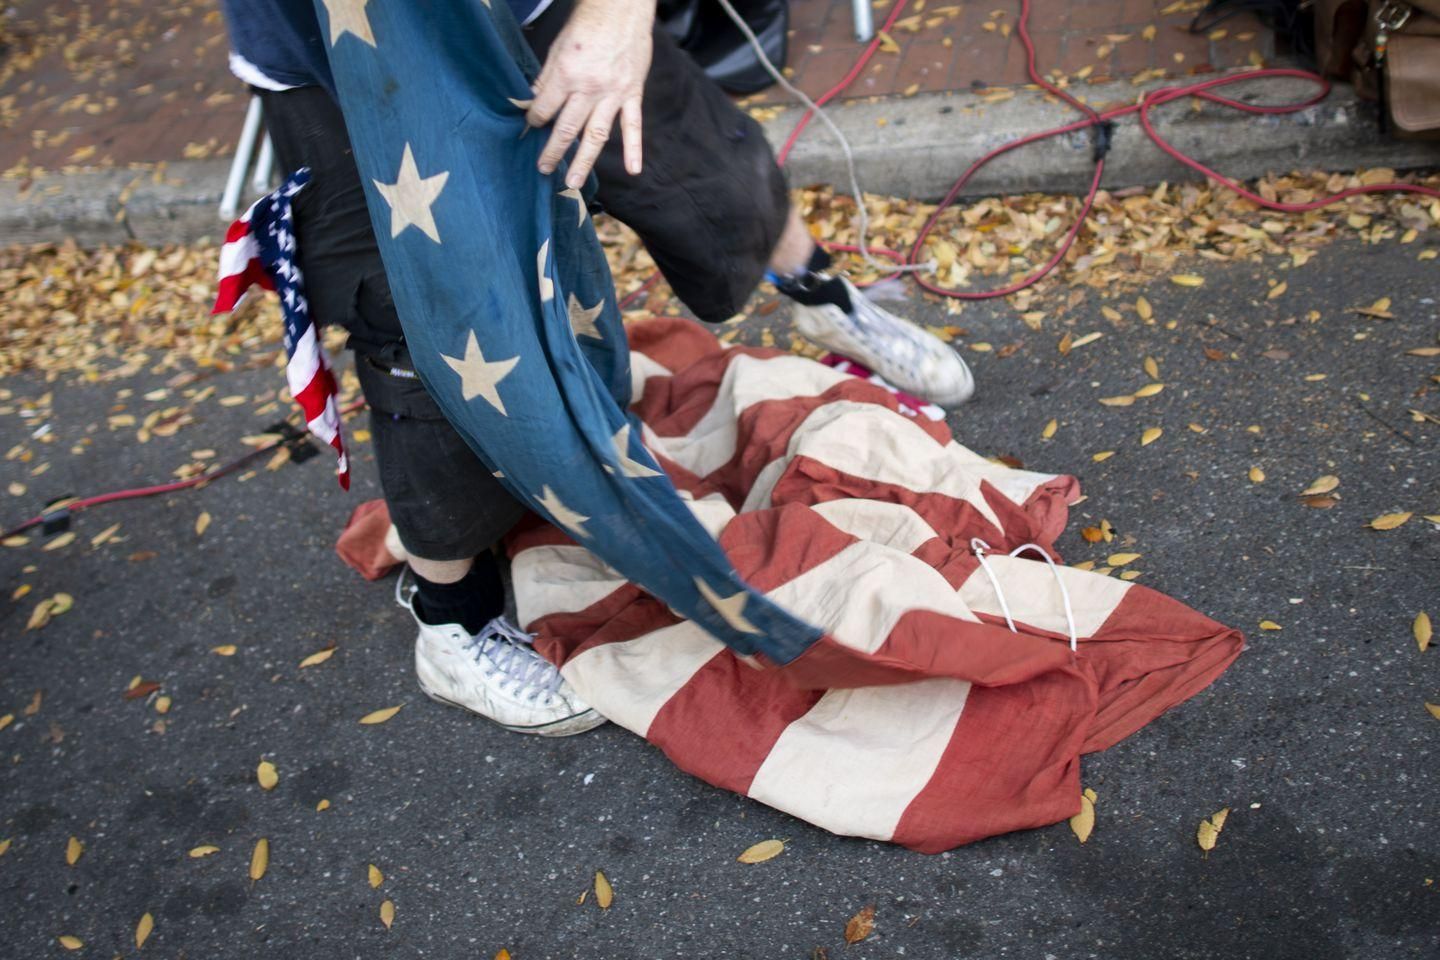 A supporter of President Trump unfurled an American flag while demonstrating Tuesday outside of a building where votes were being counted in Philadelphia (Photo: MARK MAKELA/GETTY)